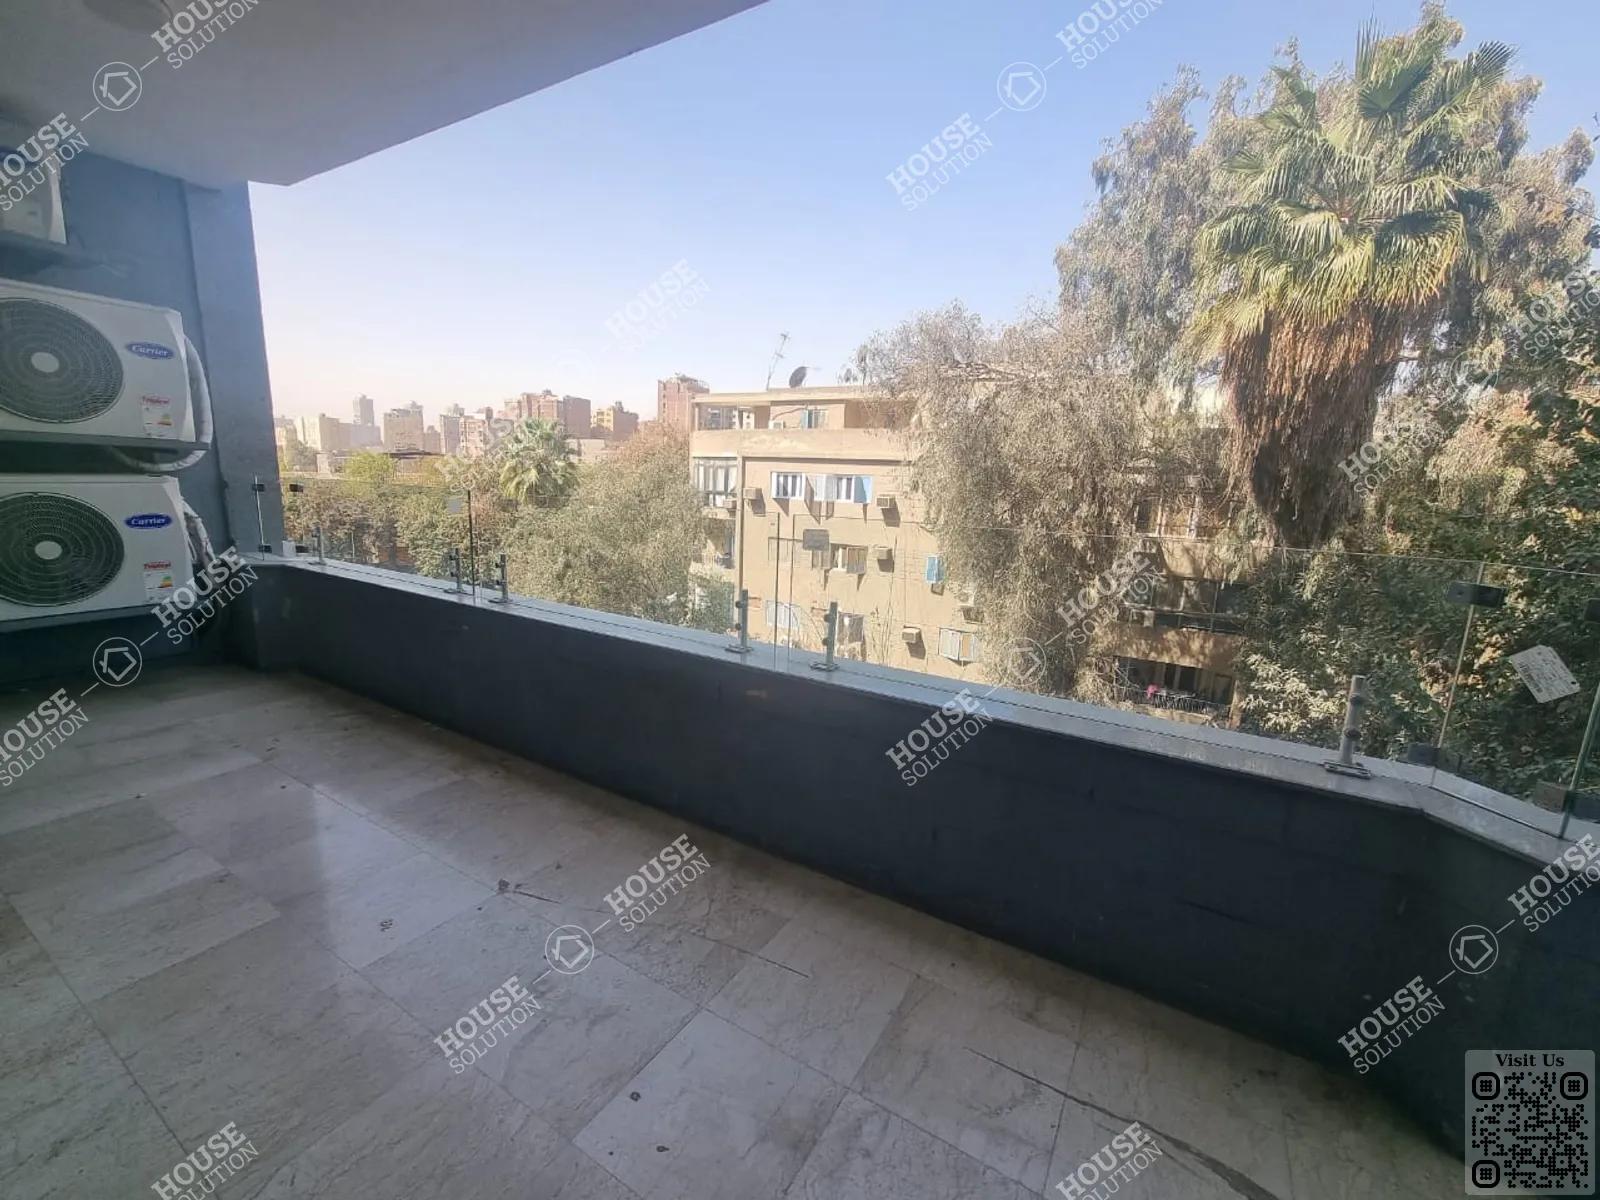 BALCONY  @ Office spaces For Rent In Maadi Maadi Sarayat Area: 900 m² consists of 10 Bedrooms 4 Bathrooms Semi furnished 5 stars #4636-1